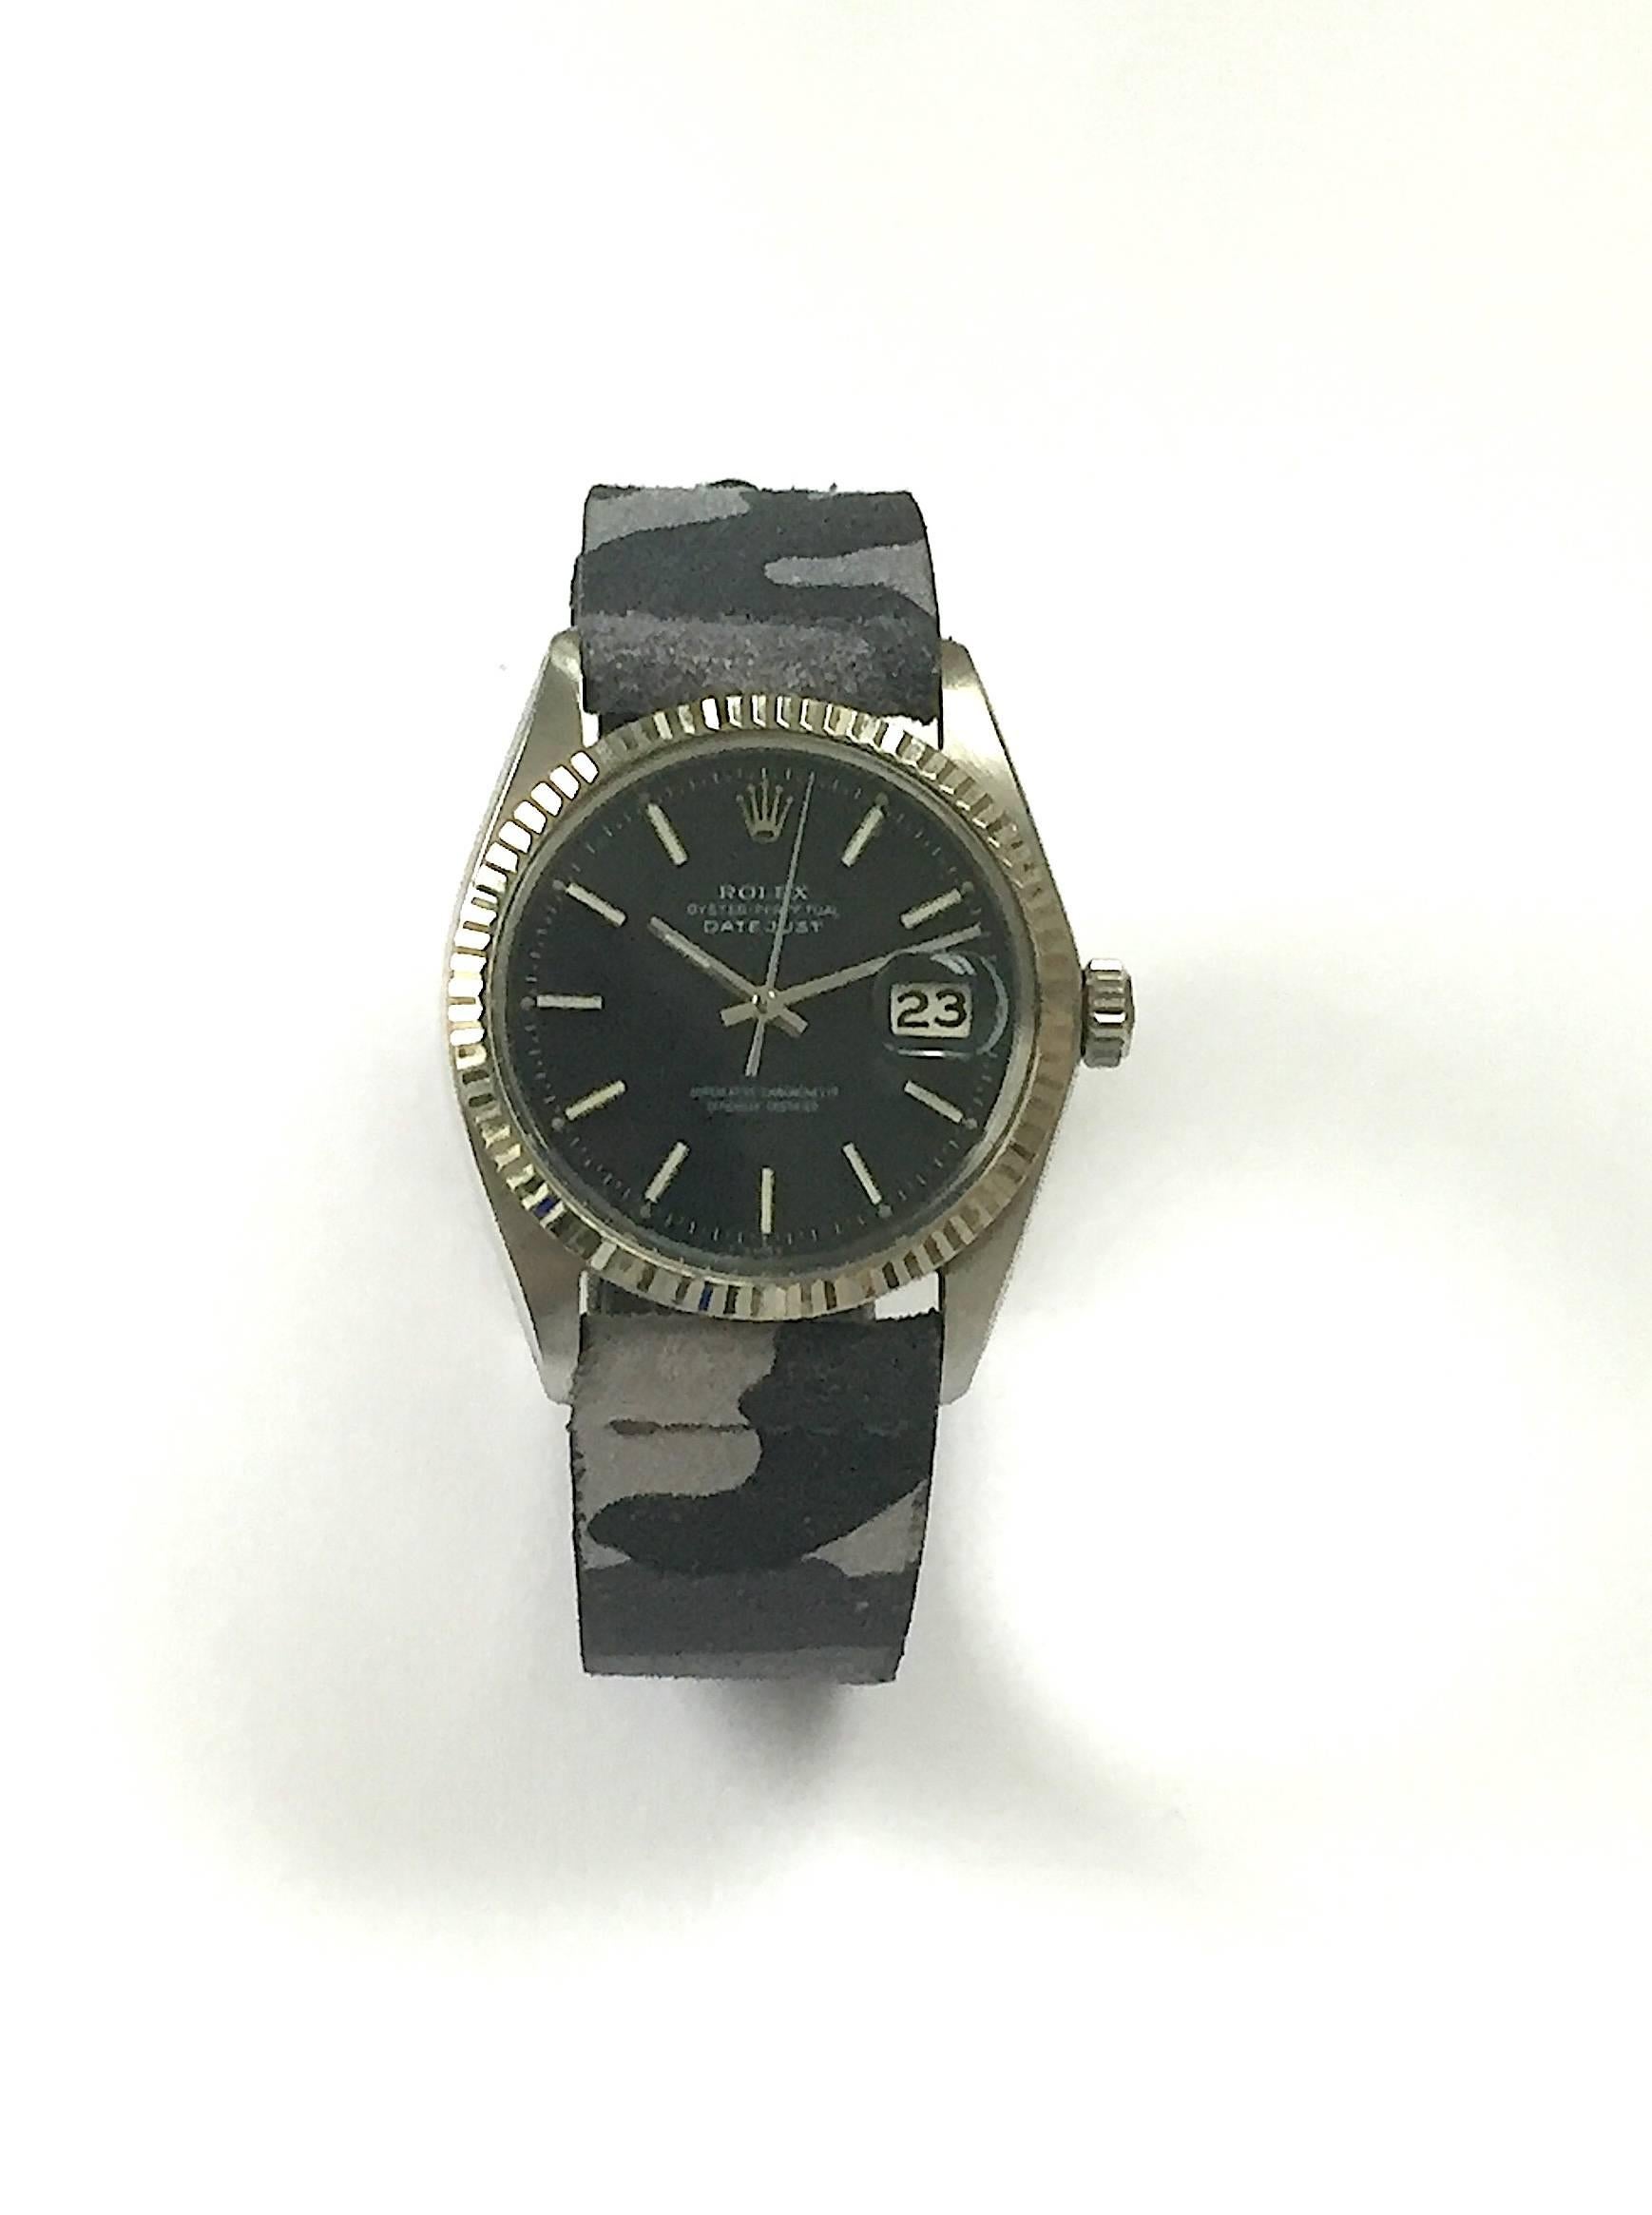 Rolex Stainless Steel and White Gold Oyster Perpetual Datejust Watch
Rare Factory Black Matte Dial with Applied White Hour Markers
White Gold Fluted Bezel
Stainless Steel Case
36mm in size 
Features Rolex Automatic Movement with Calibre 1570 with